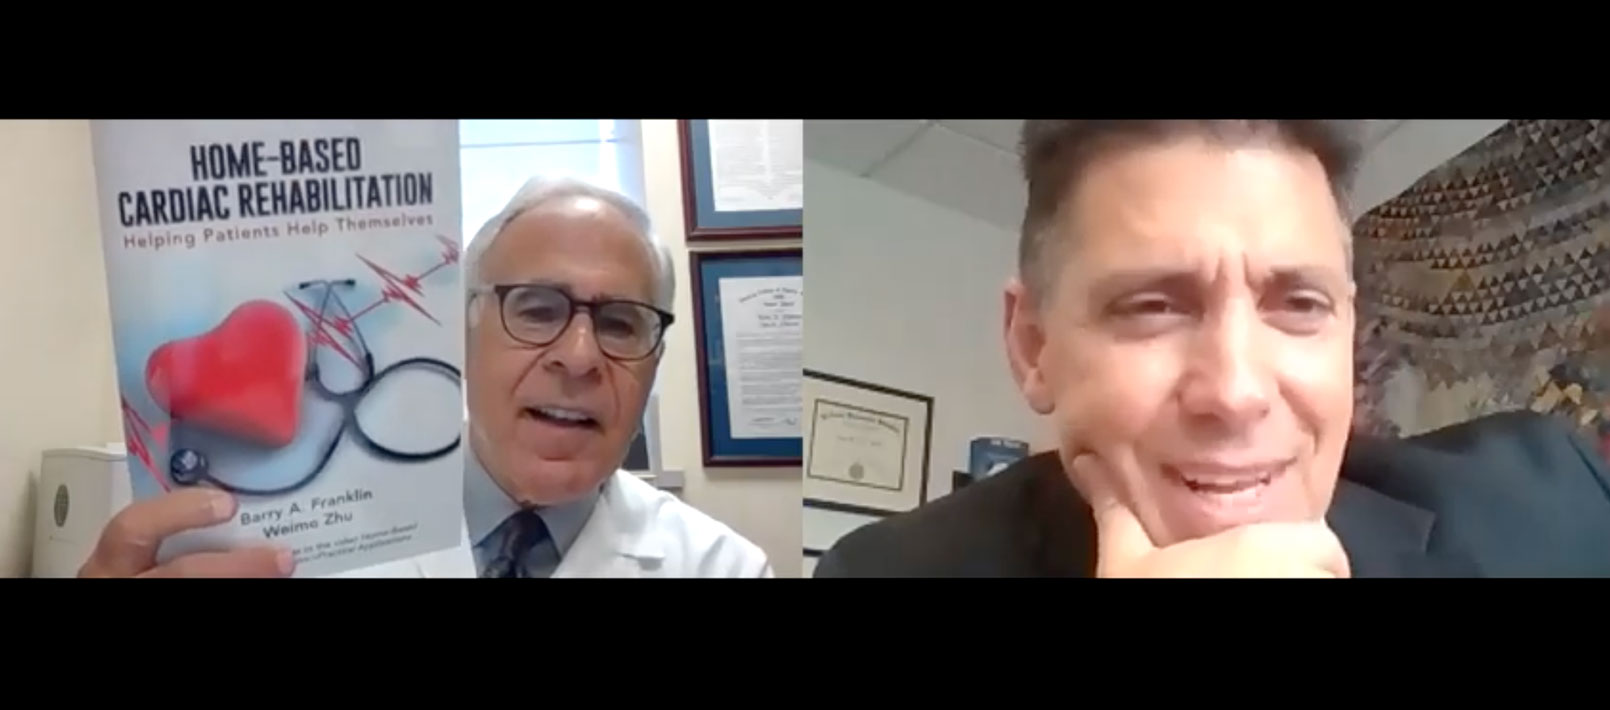 Barry Franklin PhD on left holds up his booklet, Home-Based Cardiac Rehabilitation, during Zoom interview with Tom Rifai, MD at right